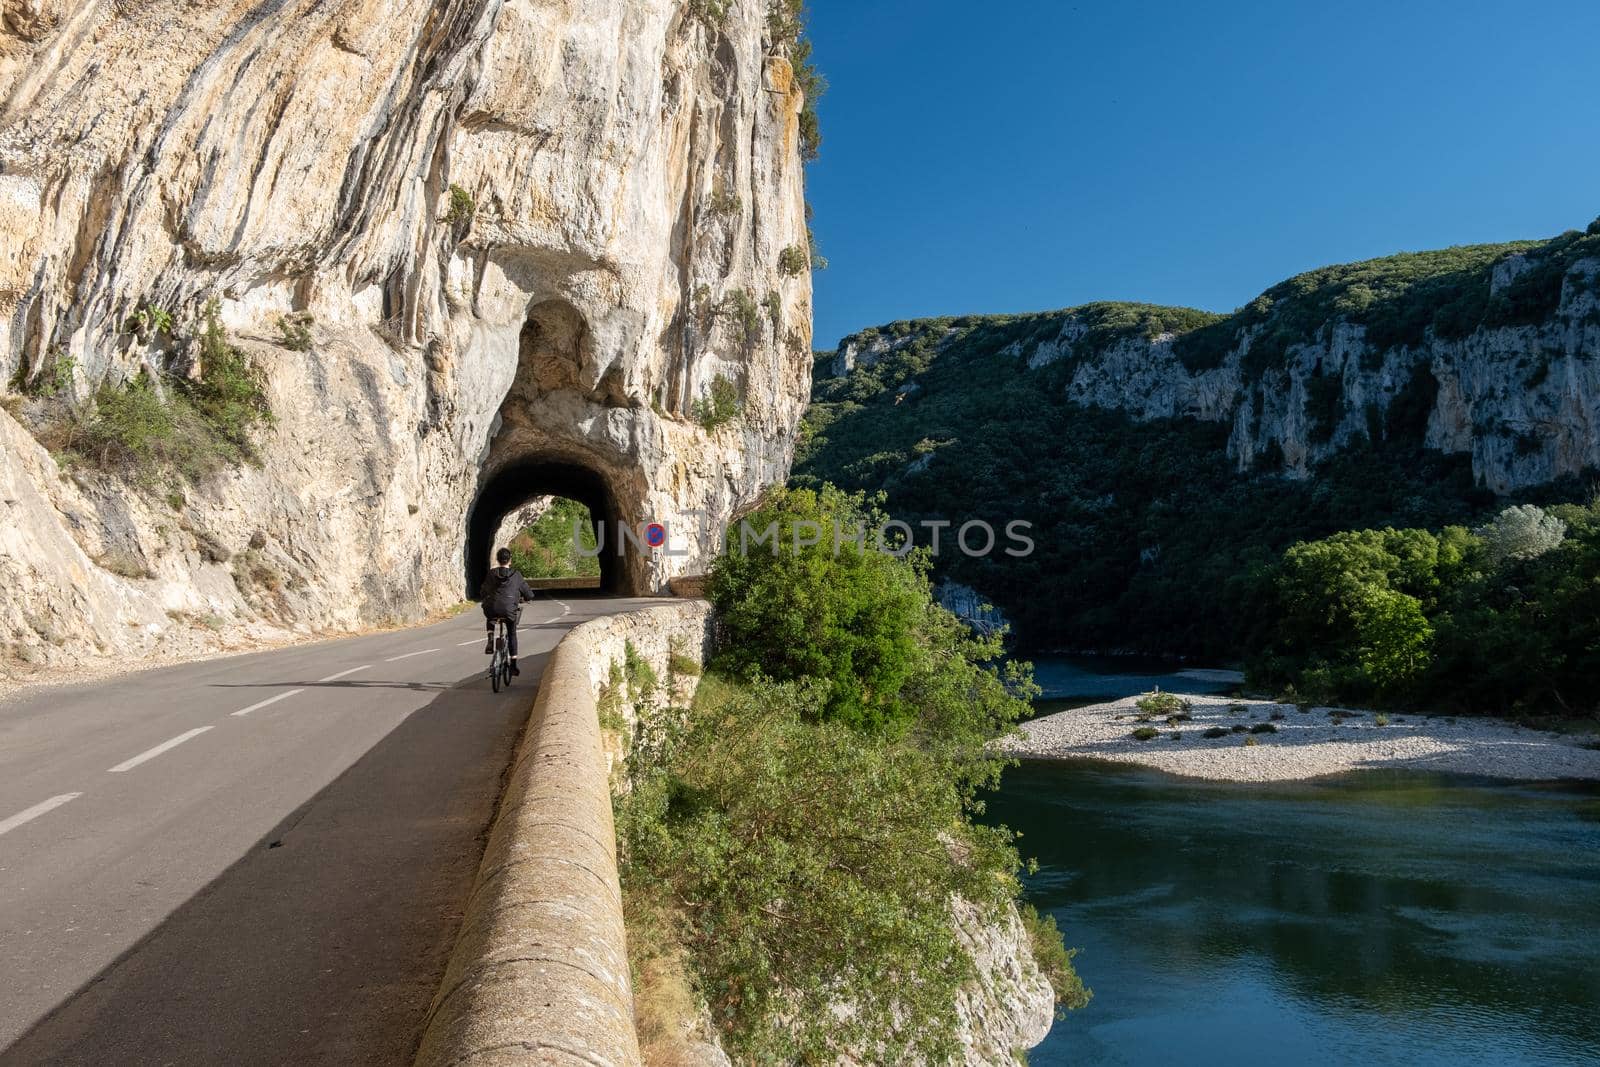 Ardeche France,view of Narural arch in Vallon Pont D'arc in Ardeche canyon in France by fokkebok